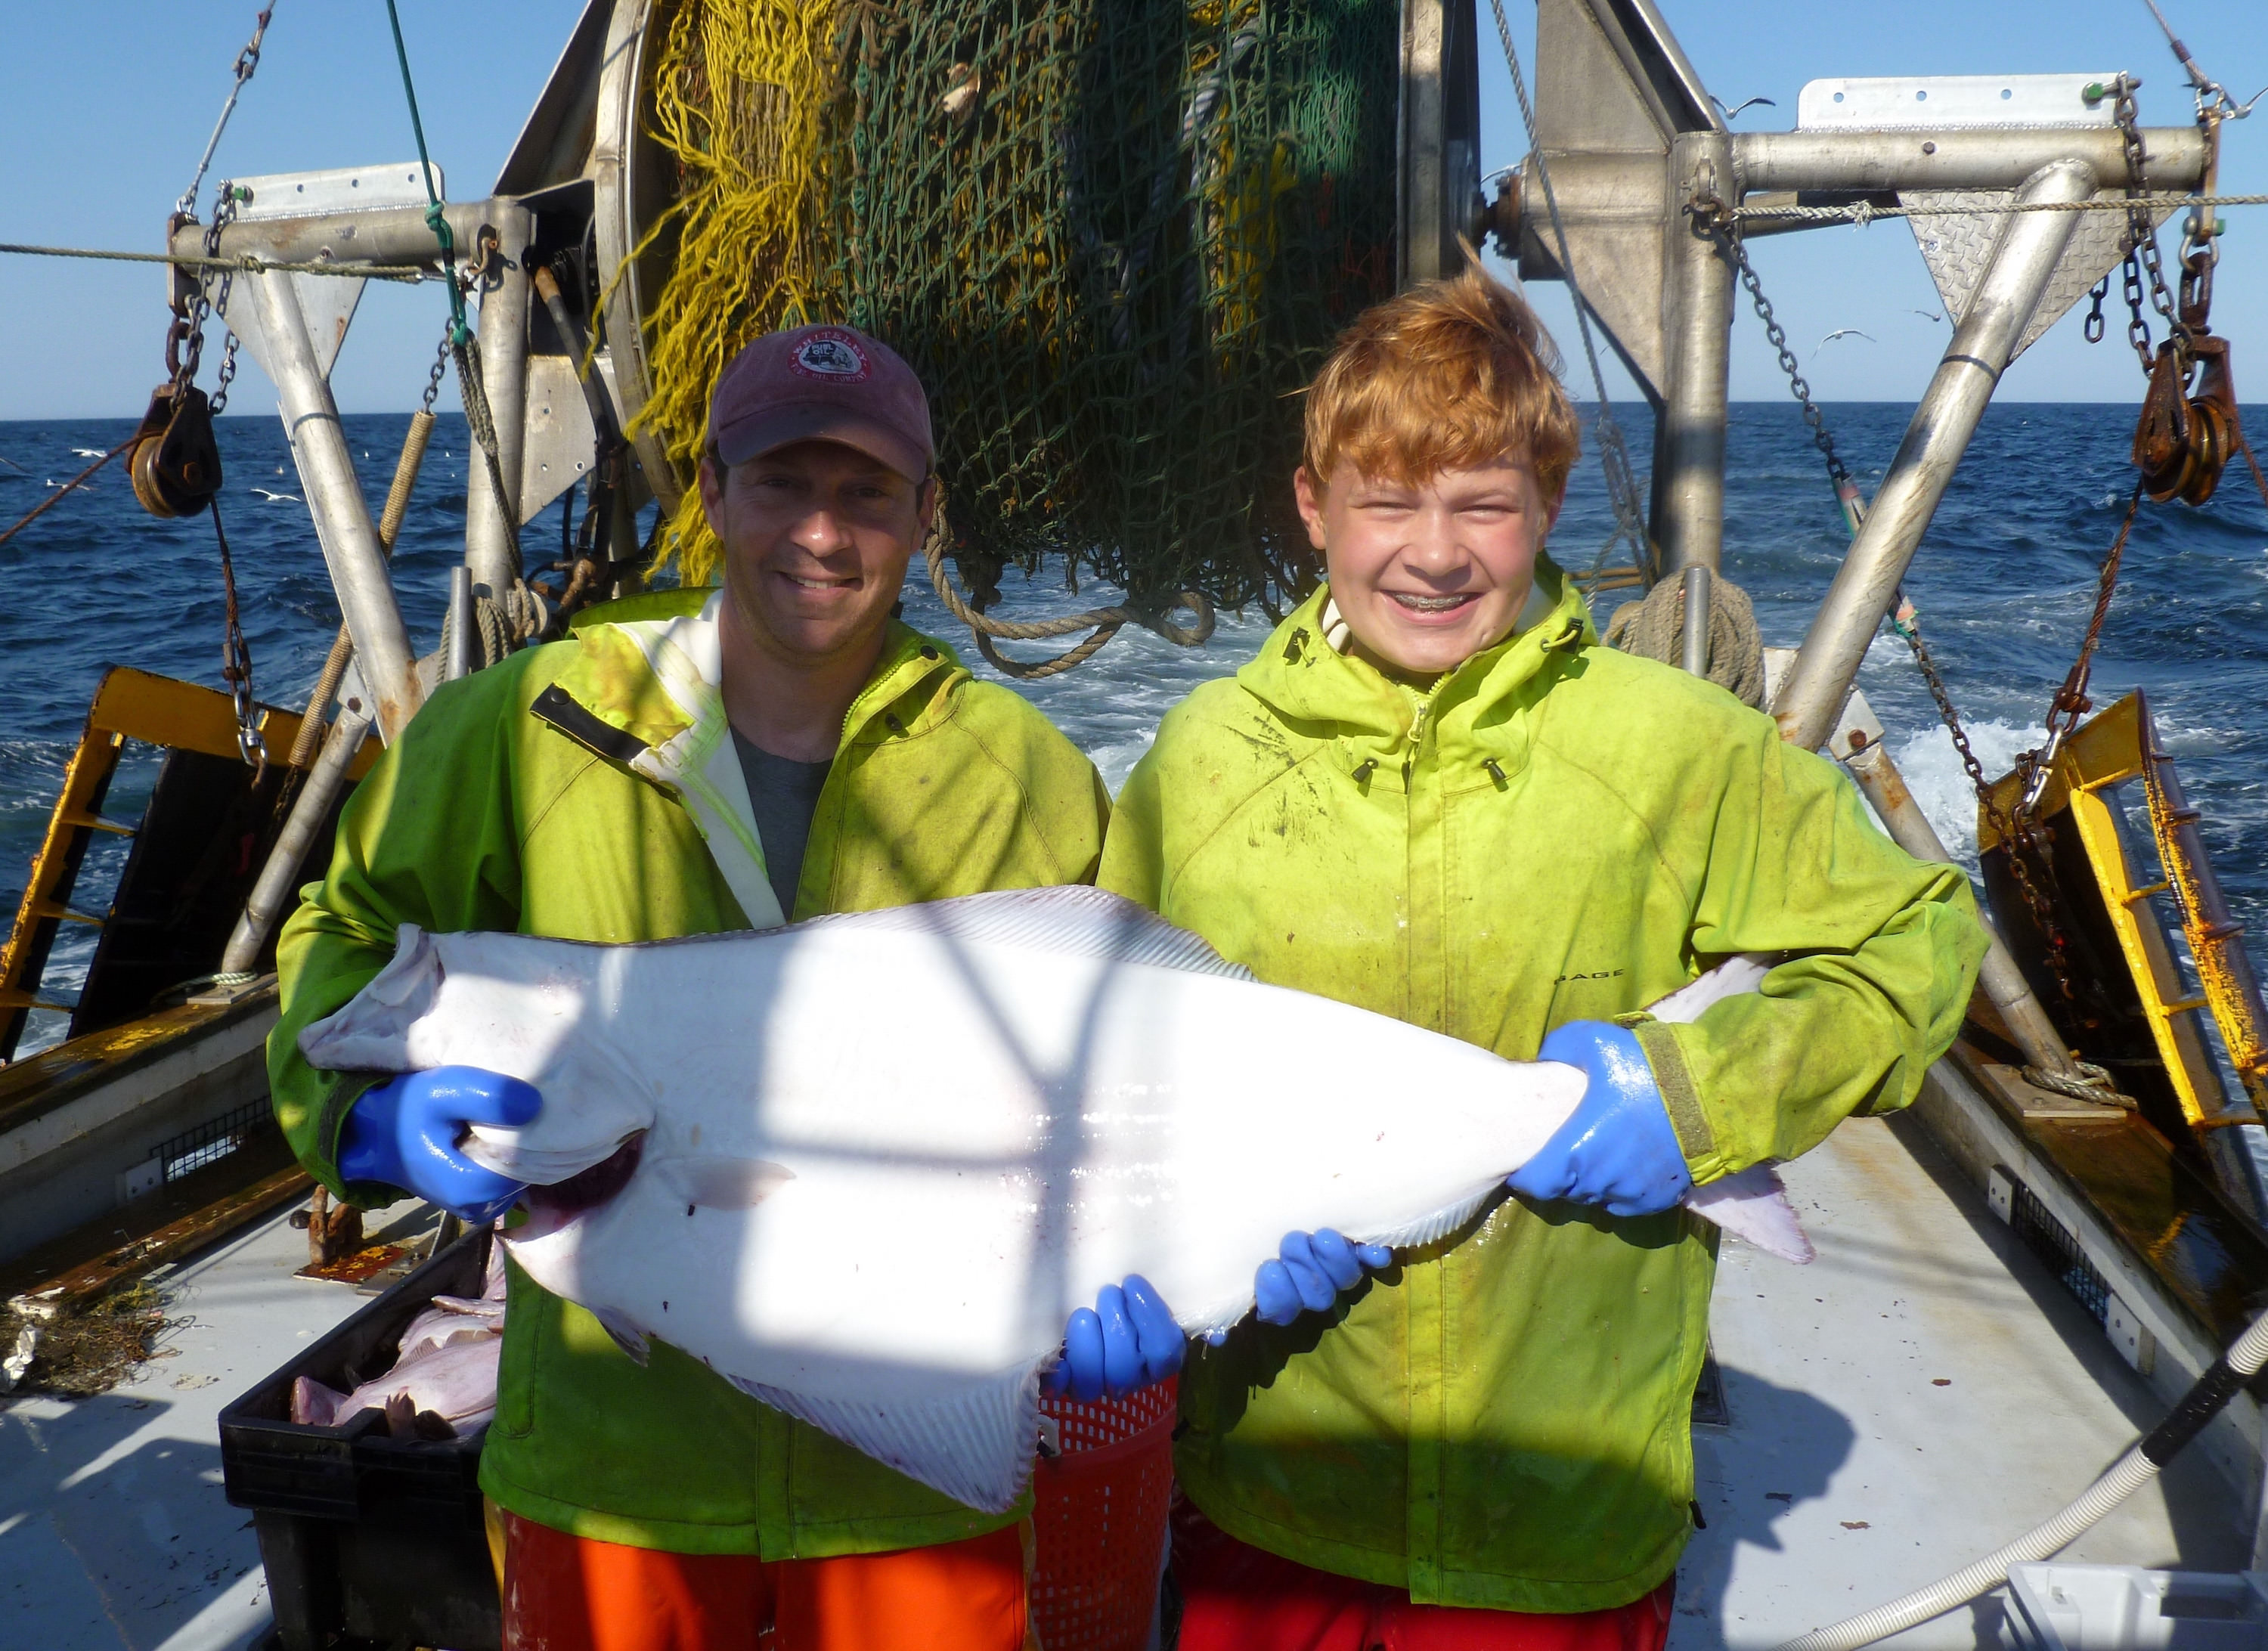 An older man and his son in bright yellow jackets hold a halibut between them, which spans the width of both their chests.